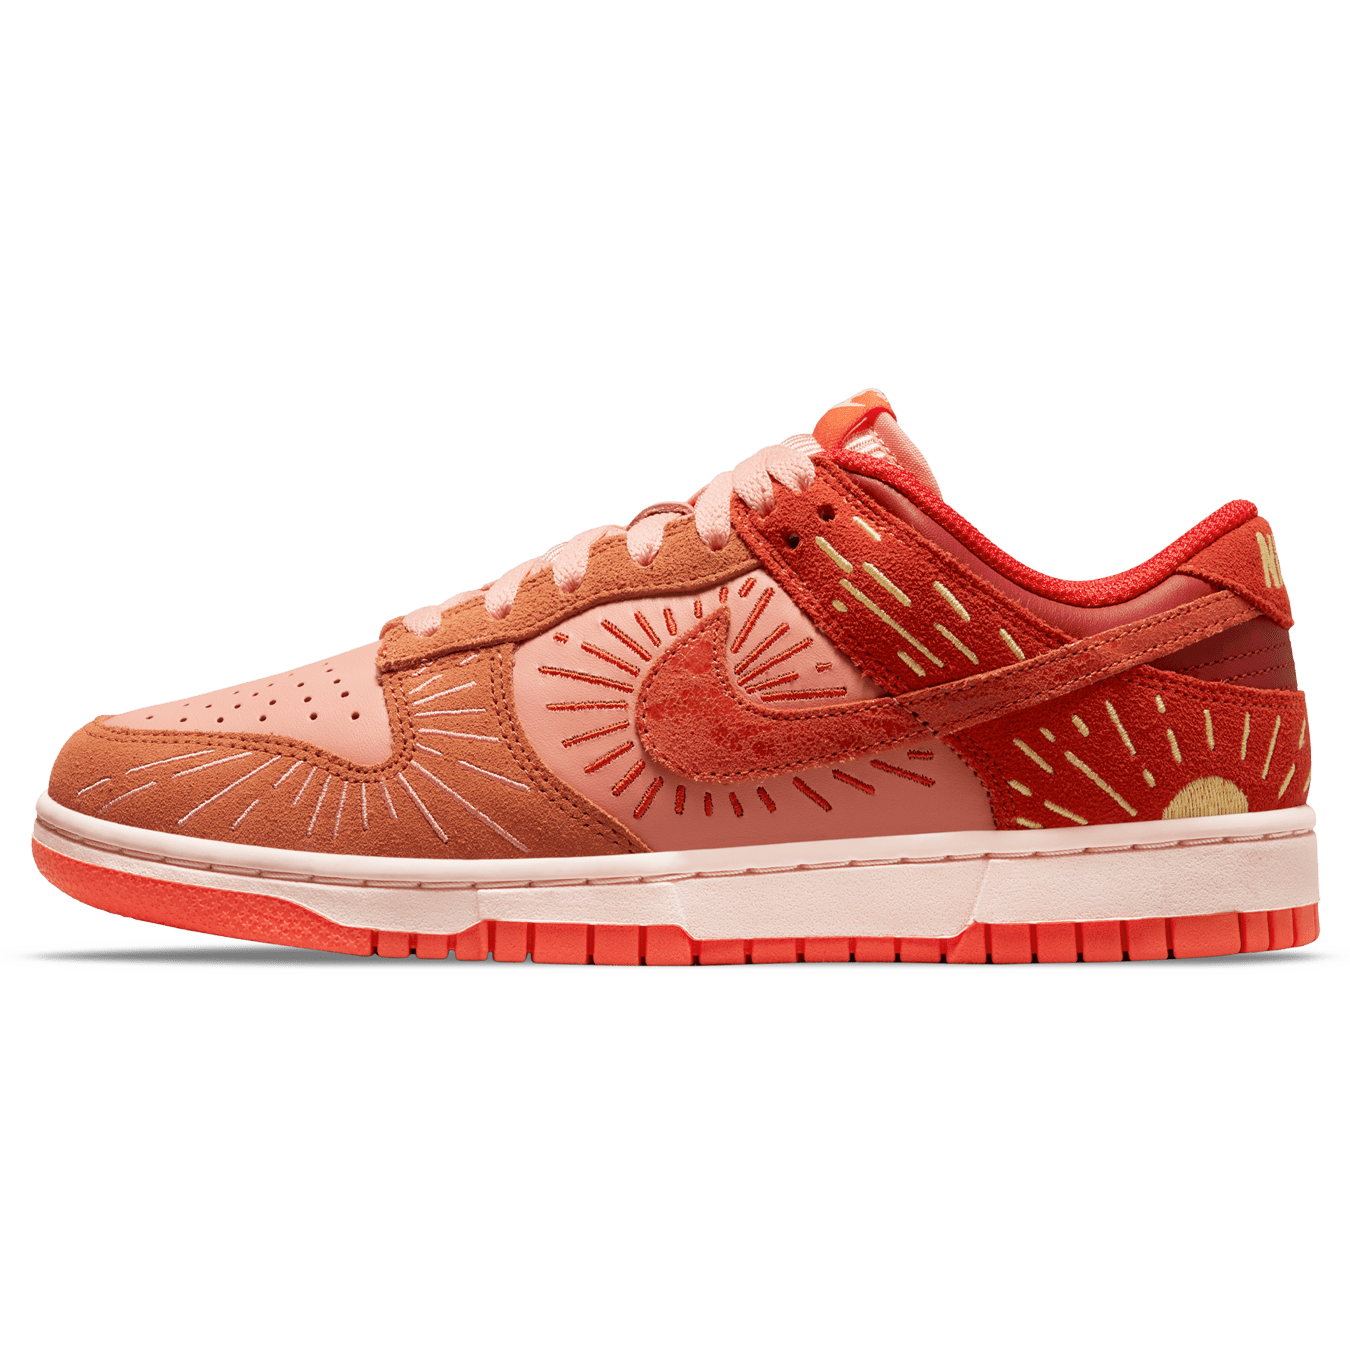 Nike Dunk Low Wmns Winter Solstice DO6723 800